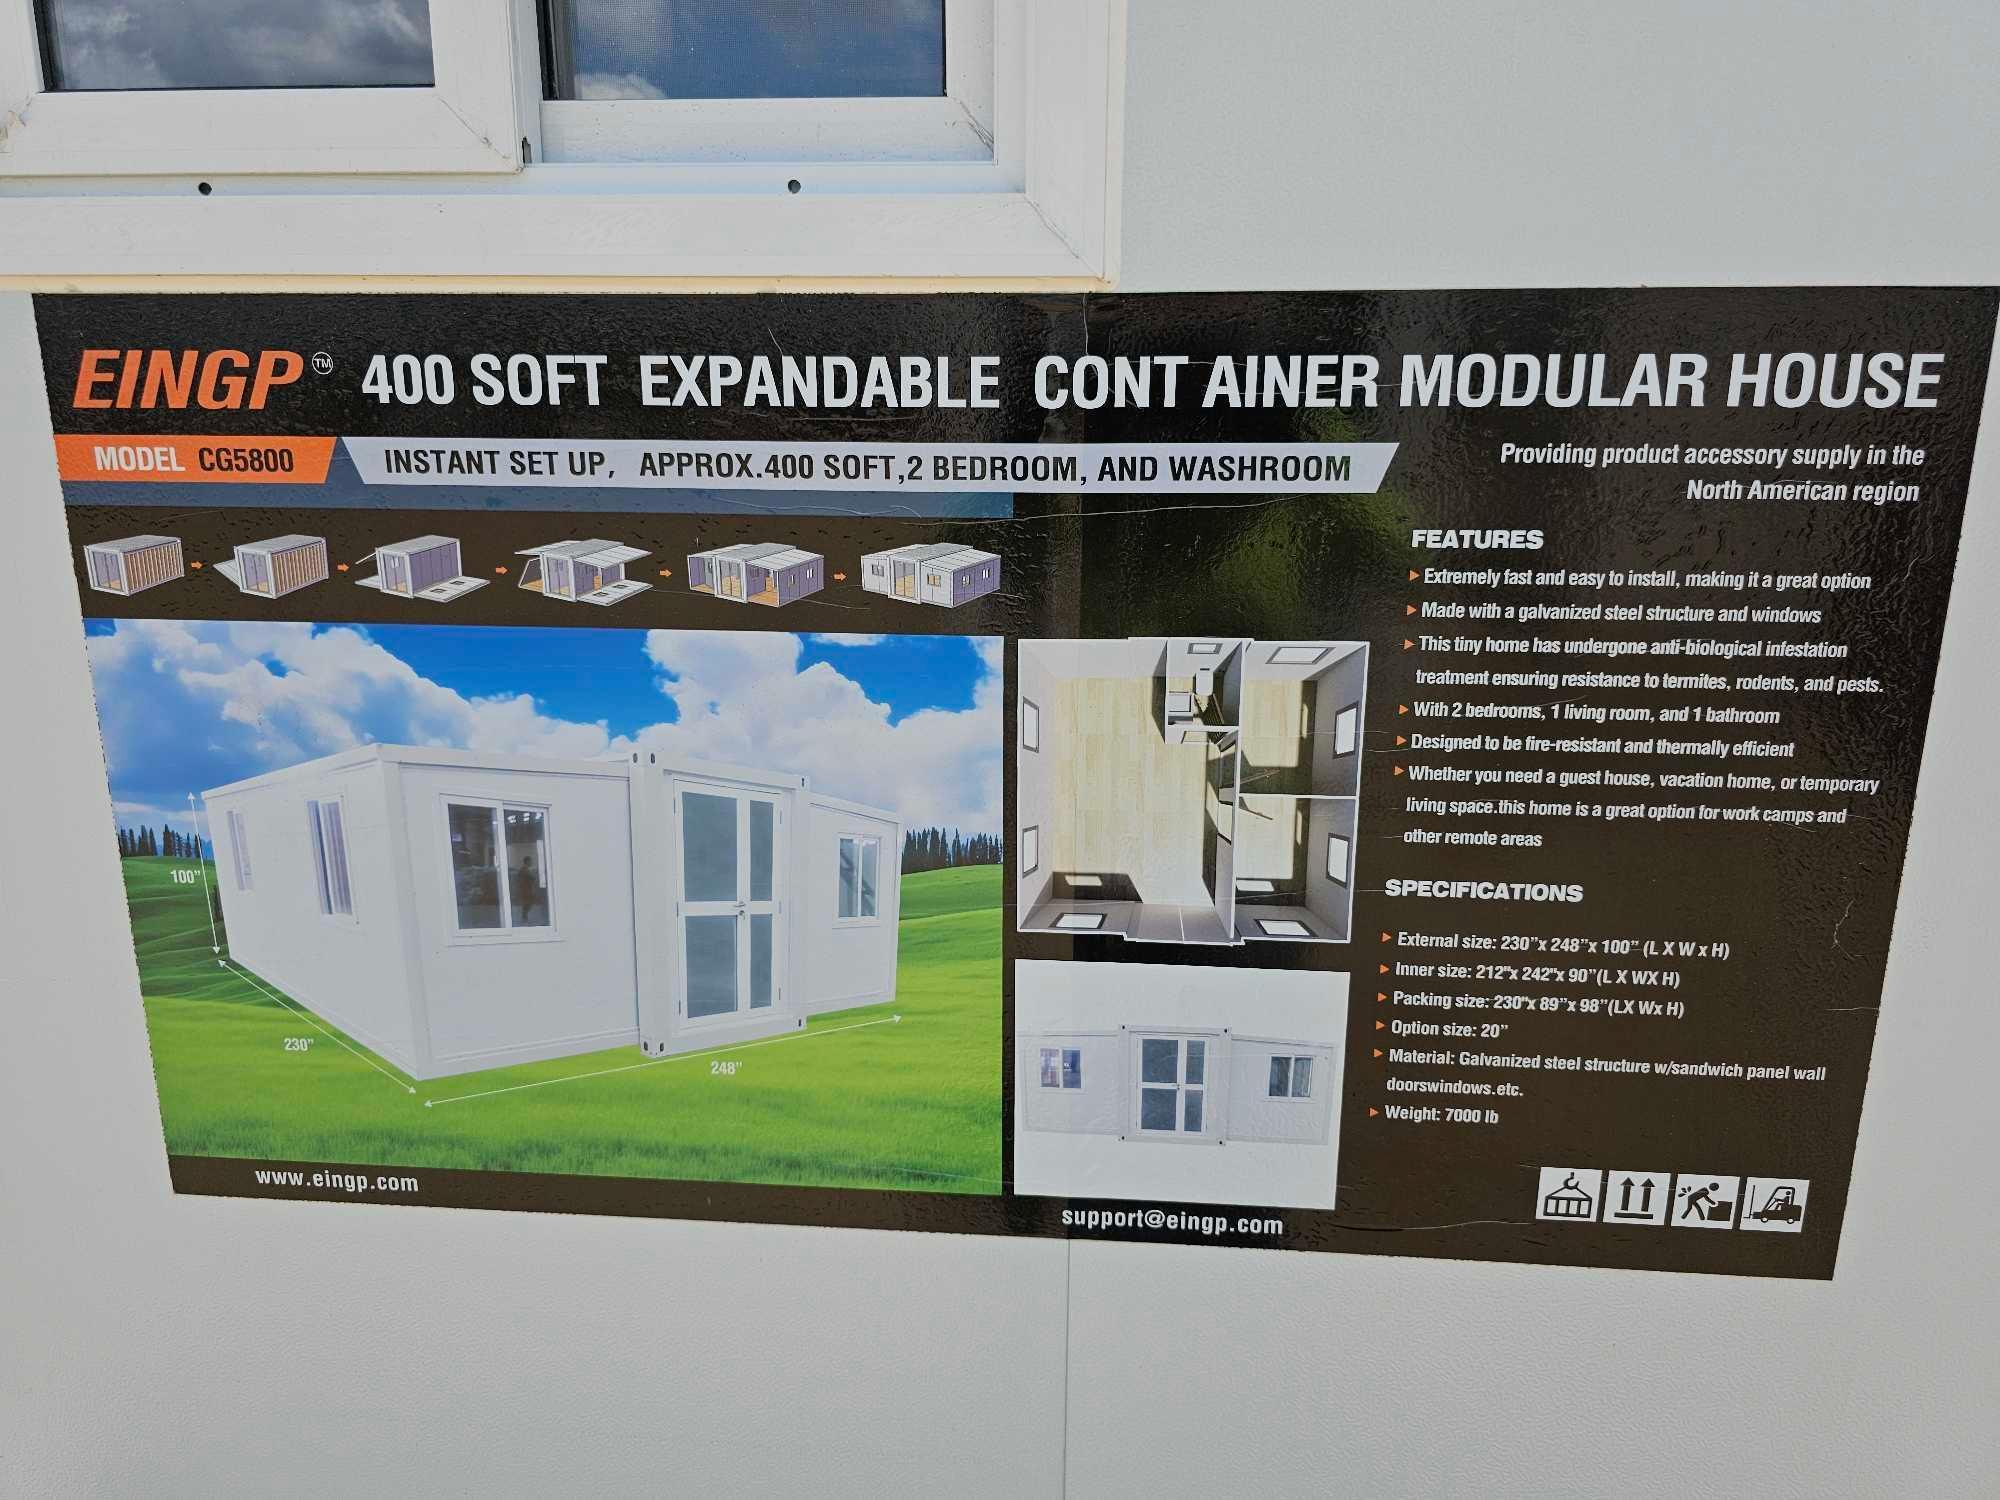 594 -ABSOLUTE - EXPANDABLE CONTAINER MODULAR HOUSE